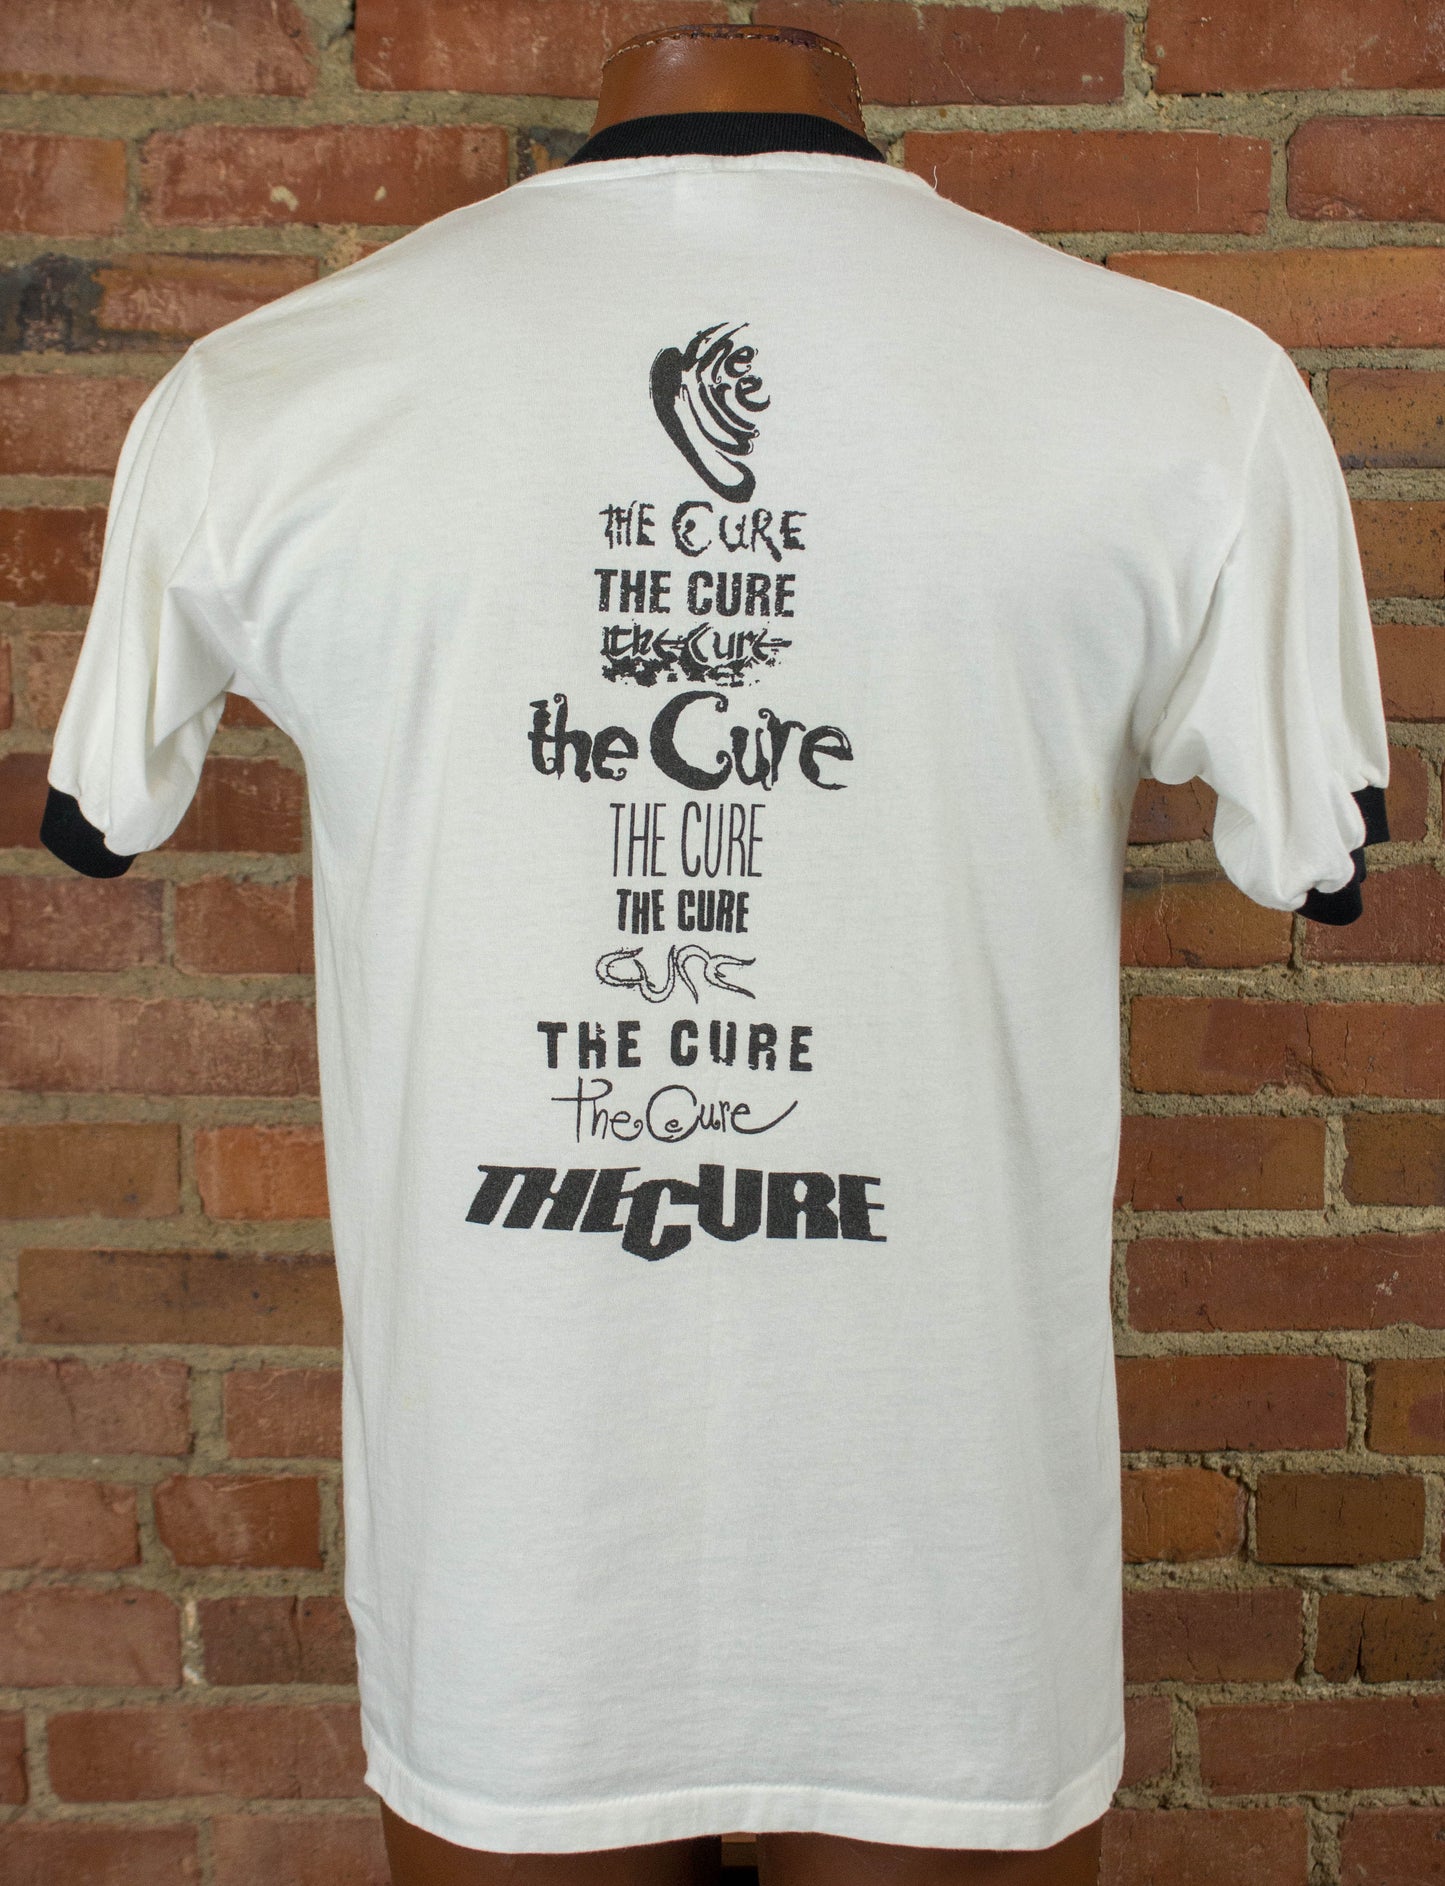 Vintage The Cure Concert T Shirt 90s Logos White and Black Ringer Large